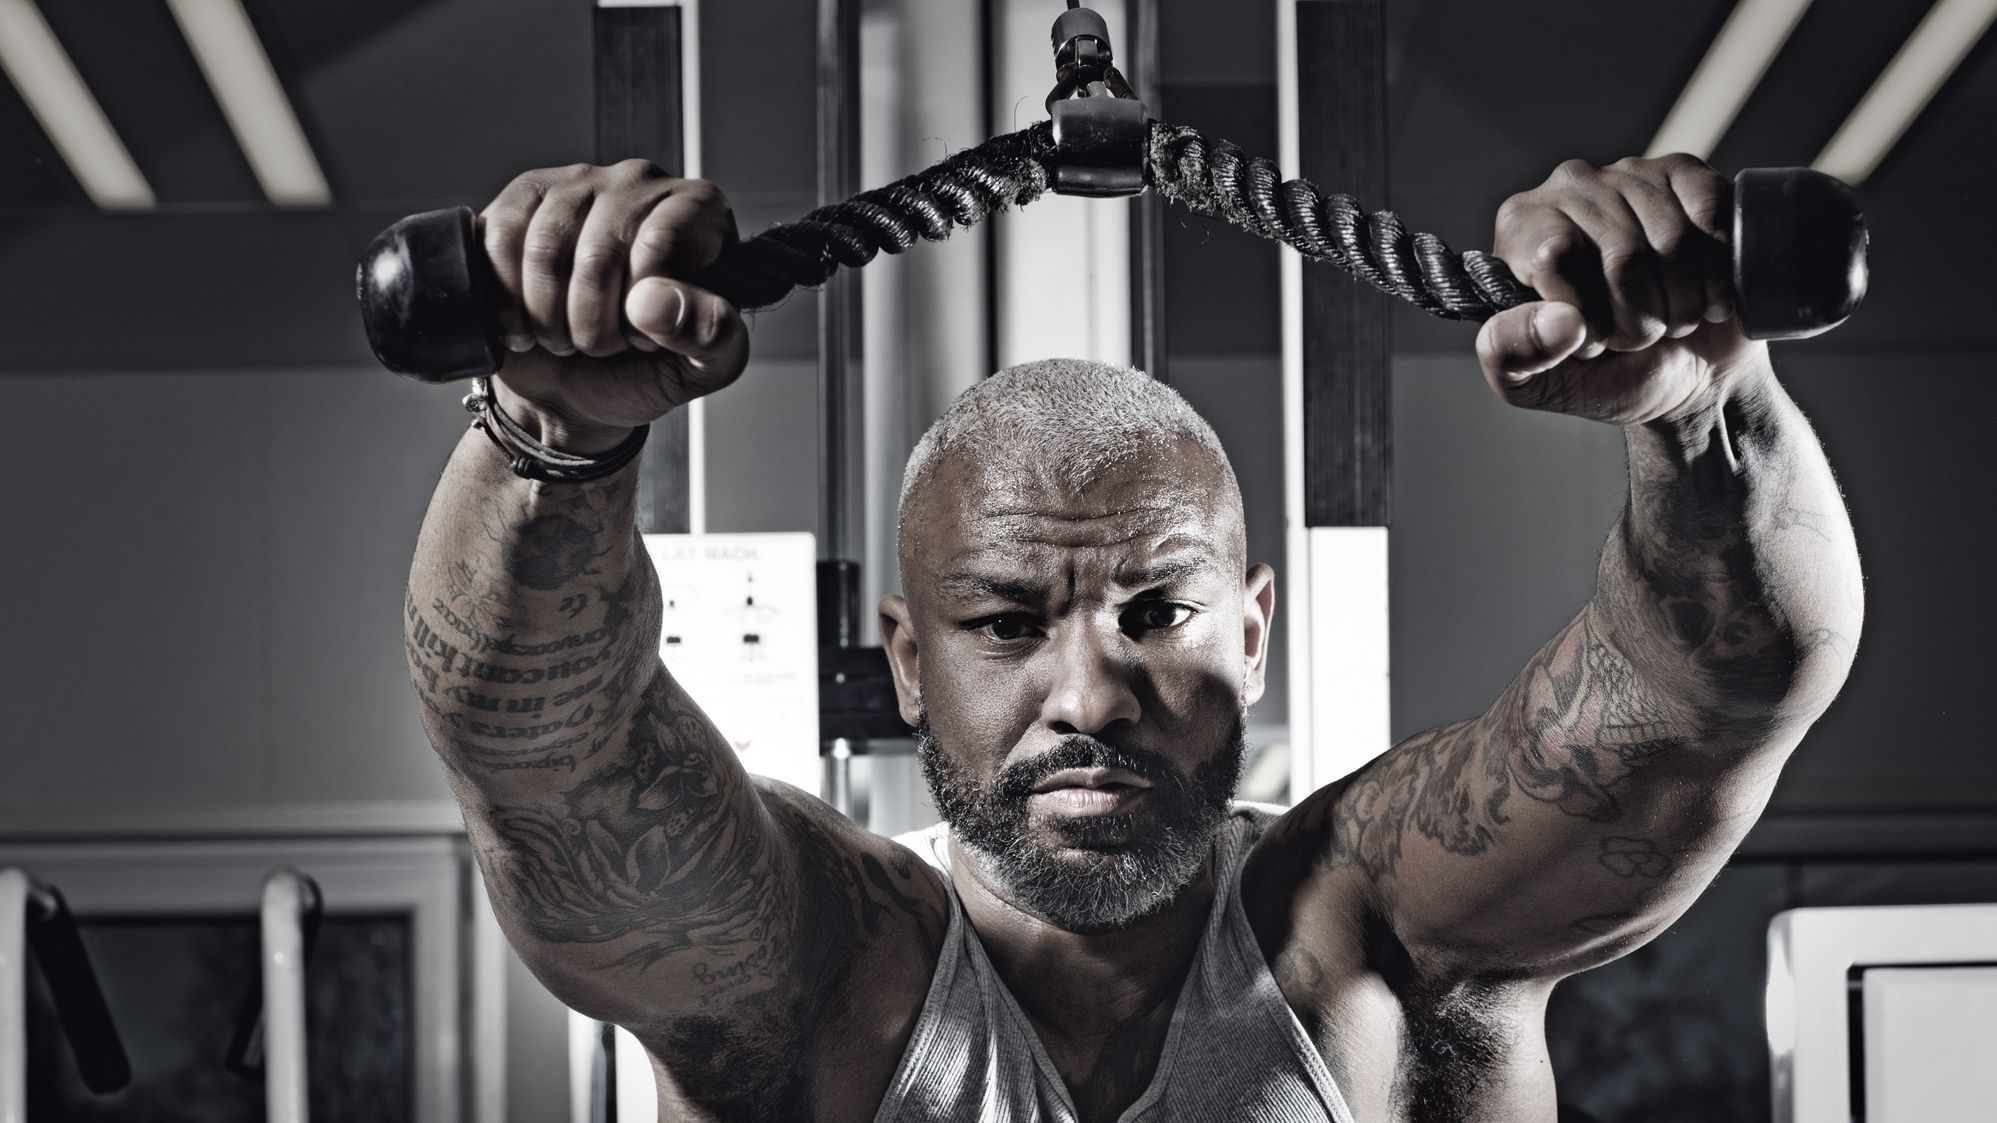 https://hips.hearstapps.com/hmg-prod/images/tattooed-middle-aged-bearded-black-man-at-a-gym-royalty-free-image-1597421419.jpg?crop=1xw:0.74751xh;center,top